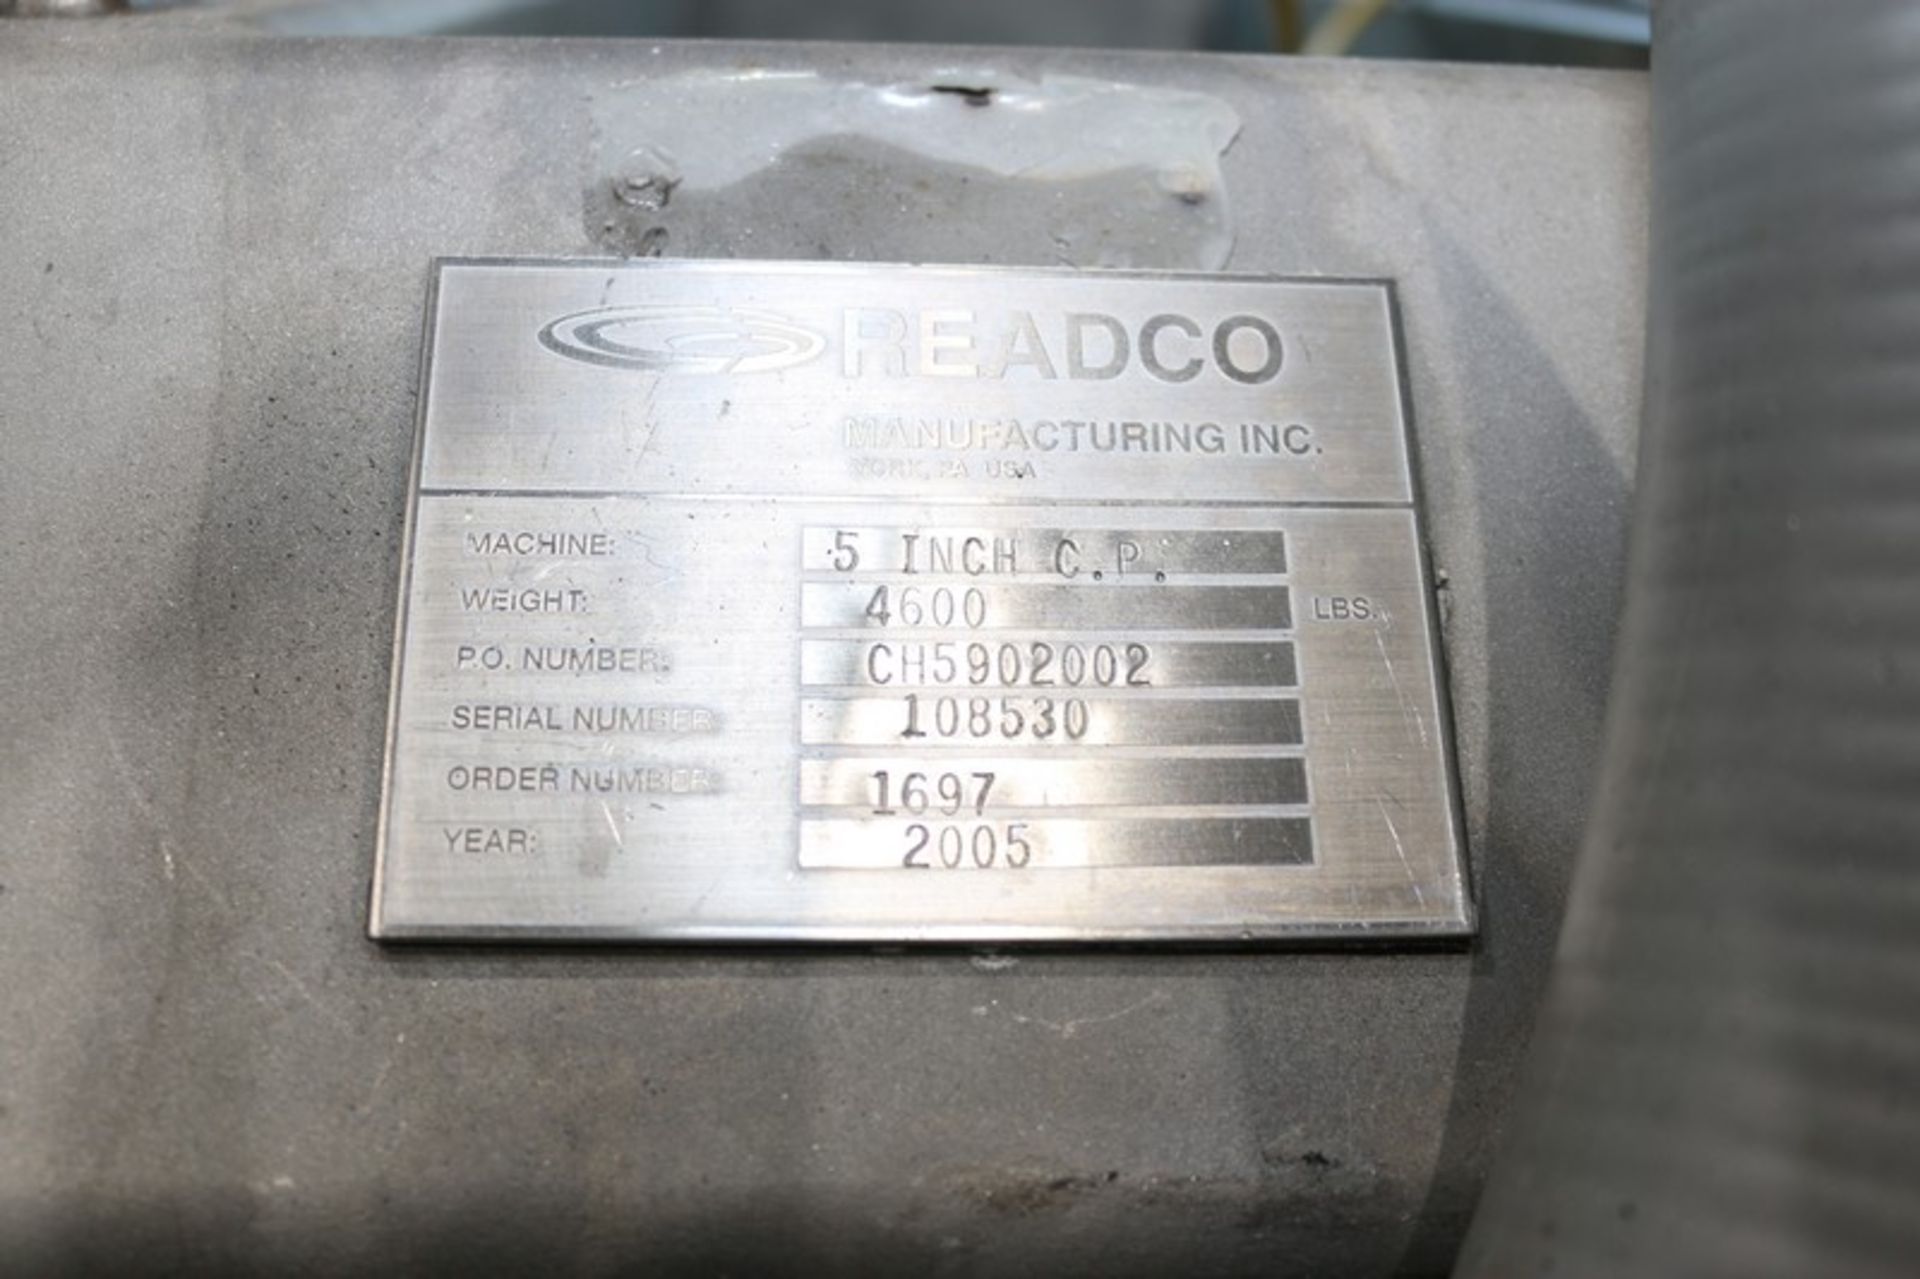 2005 Readco S/S Extruder,Machine 5 Inch C.P., S/N 108530, with Some S/S Spare Parts, Includes (2) - Image 7 of 9